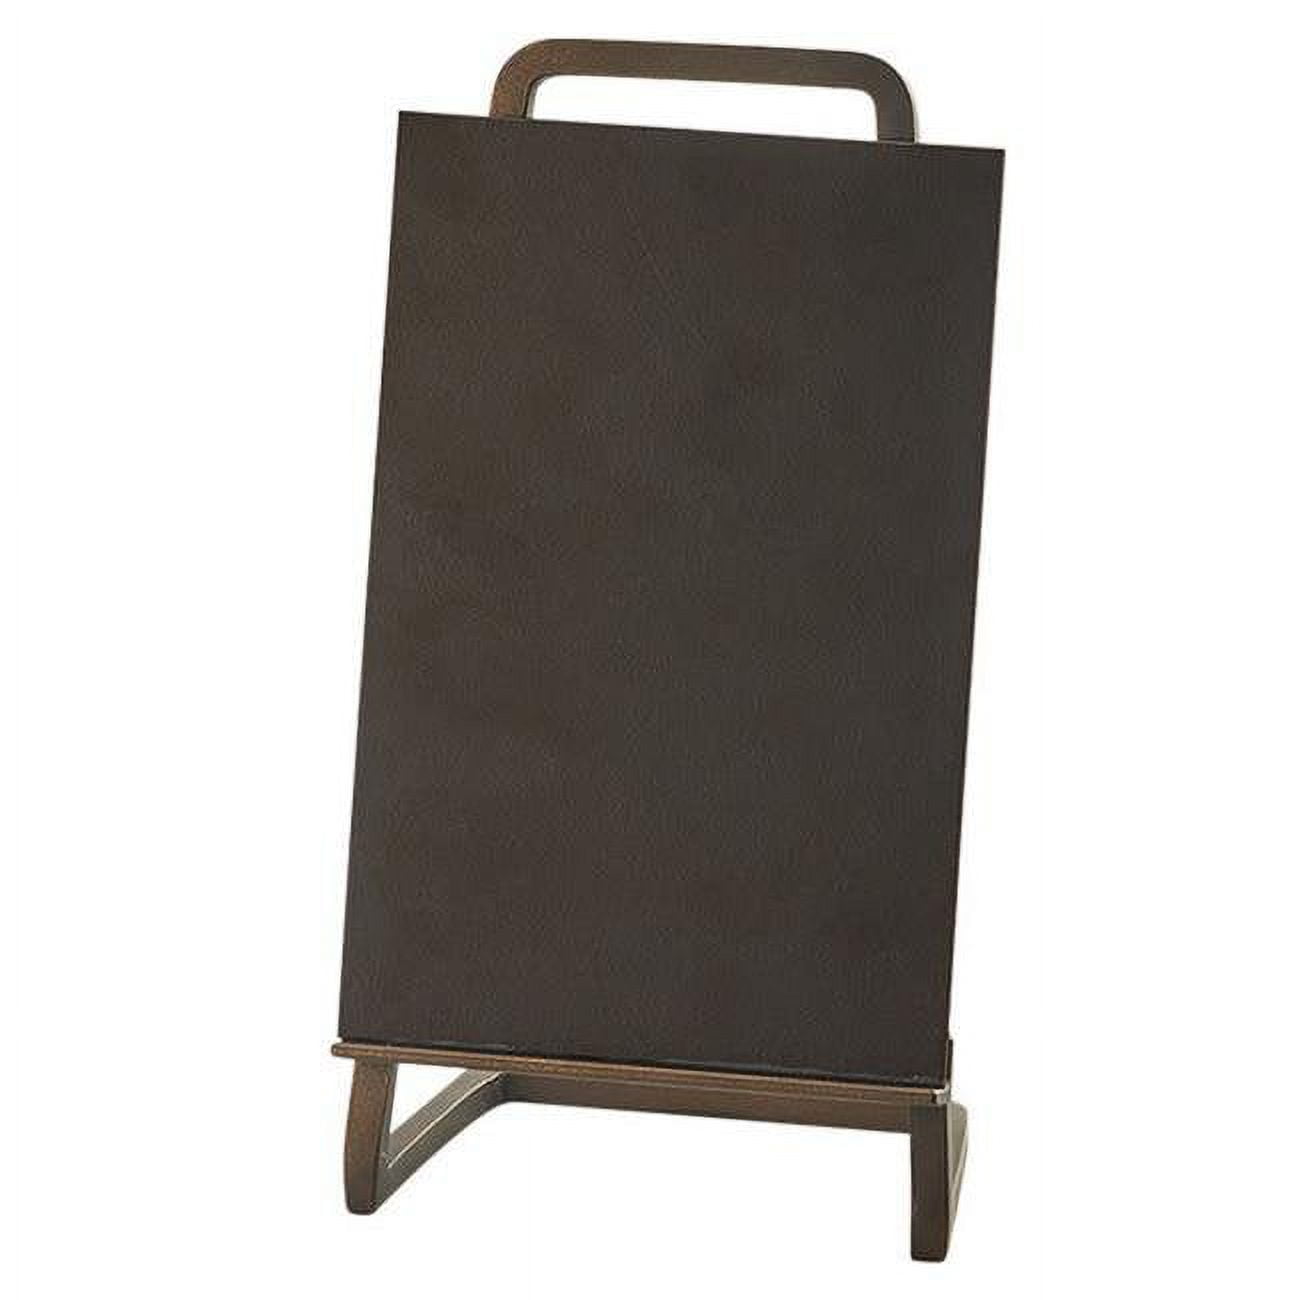 Picture of Cal Mil 3919-46-84 Sierra Chalkboard Stand - 4 x 2 x 6.75 in.